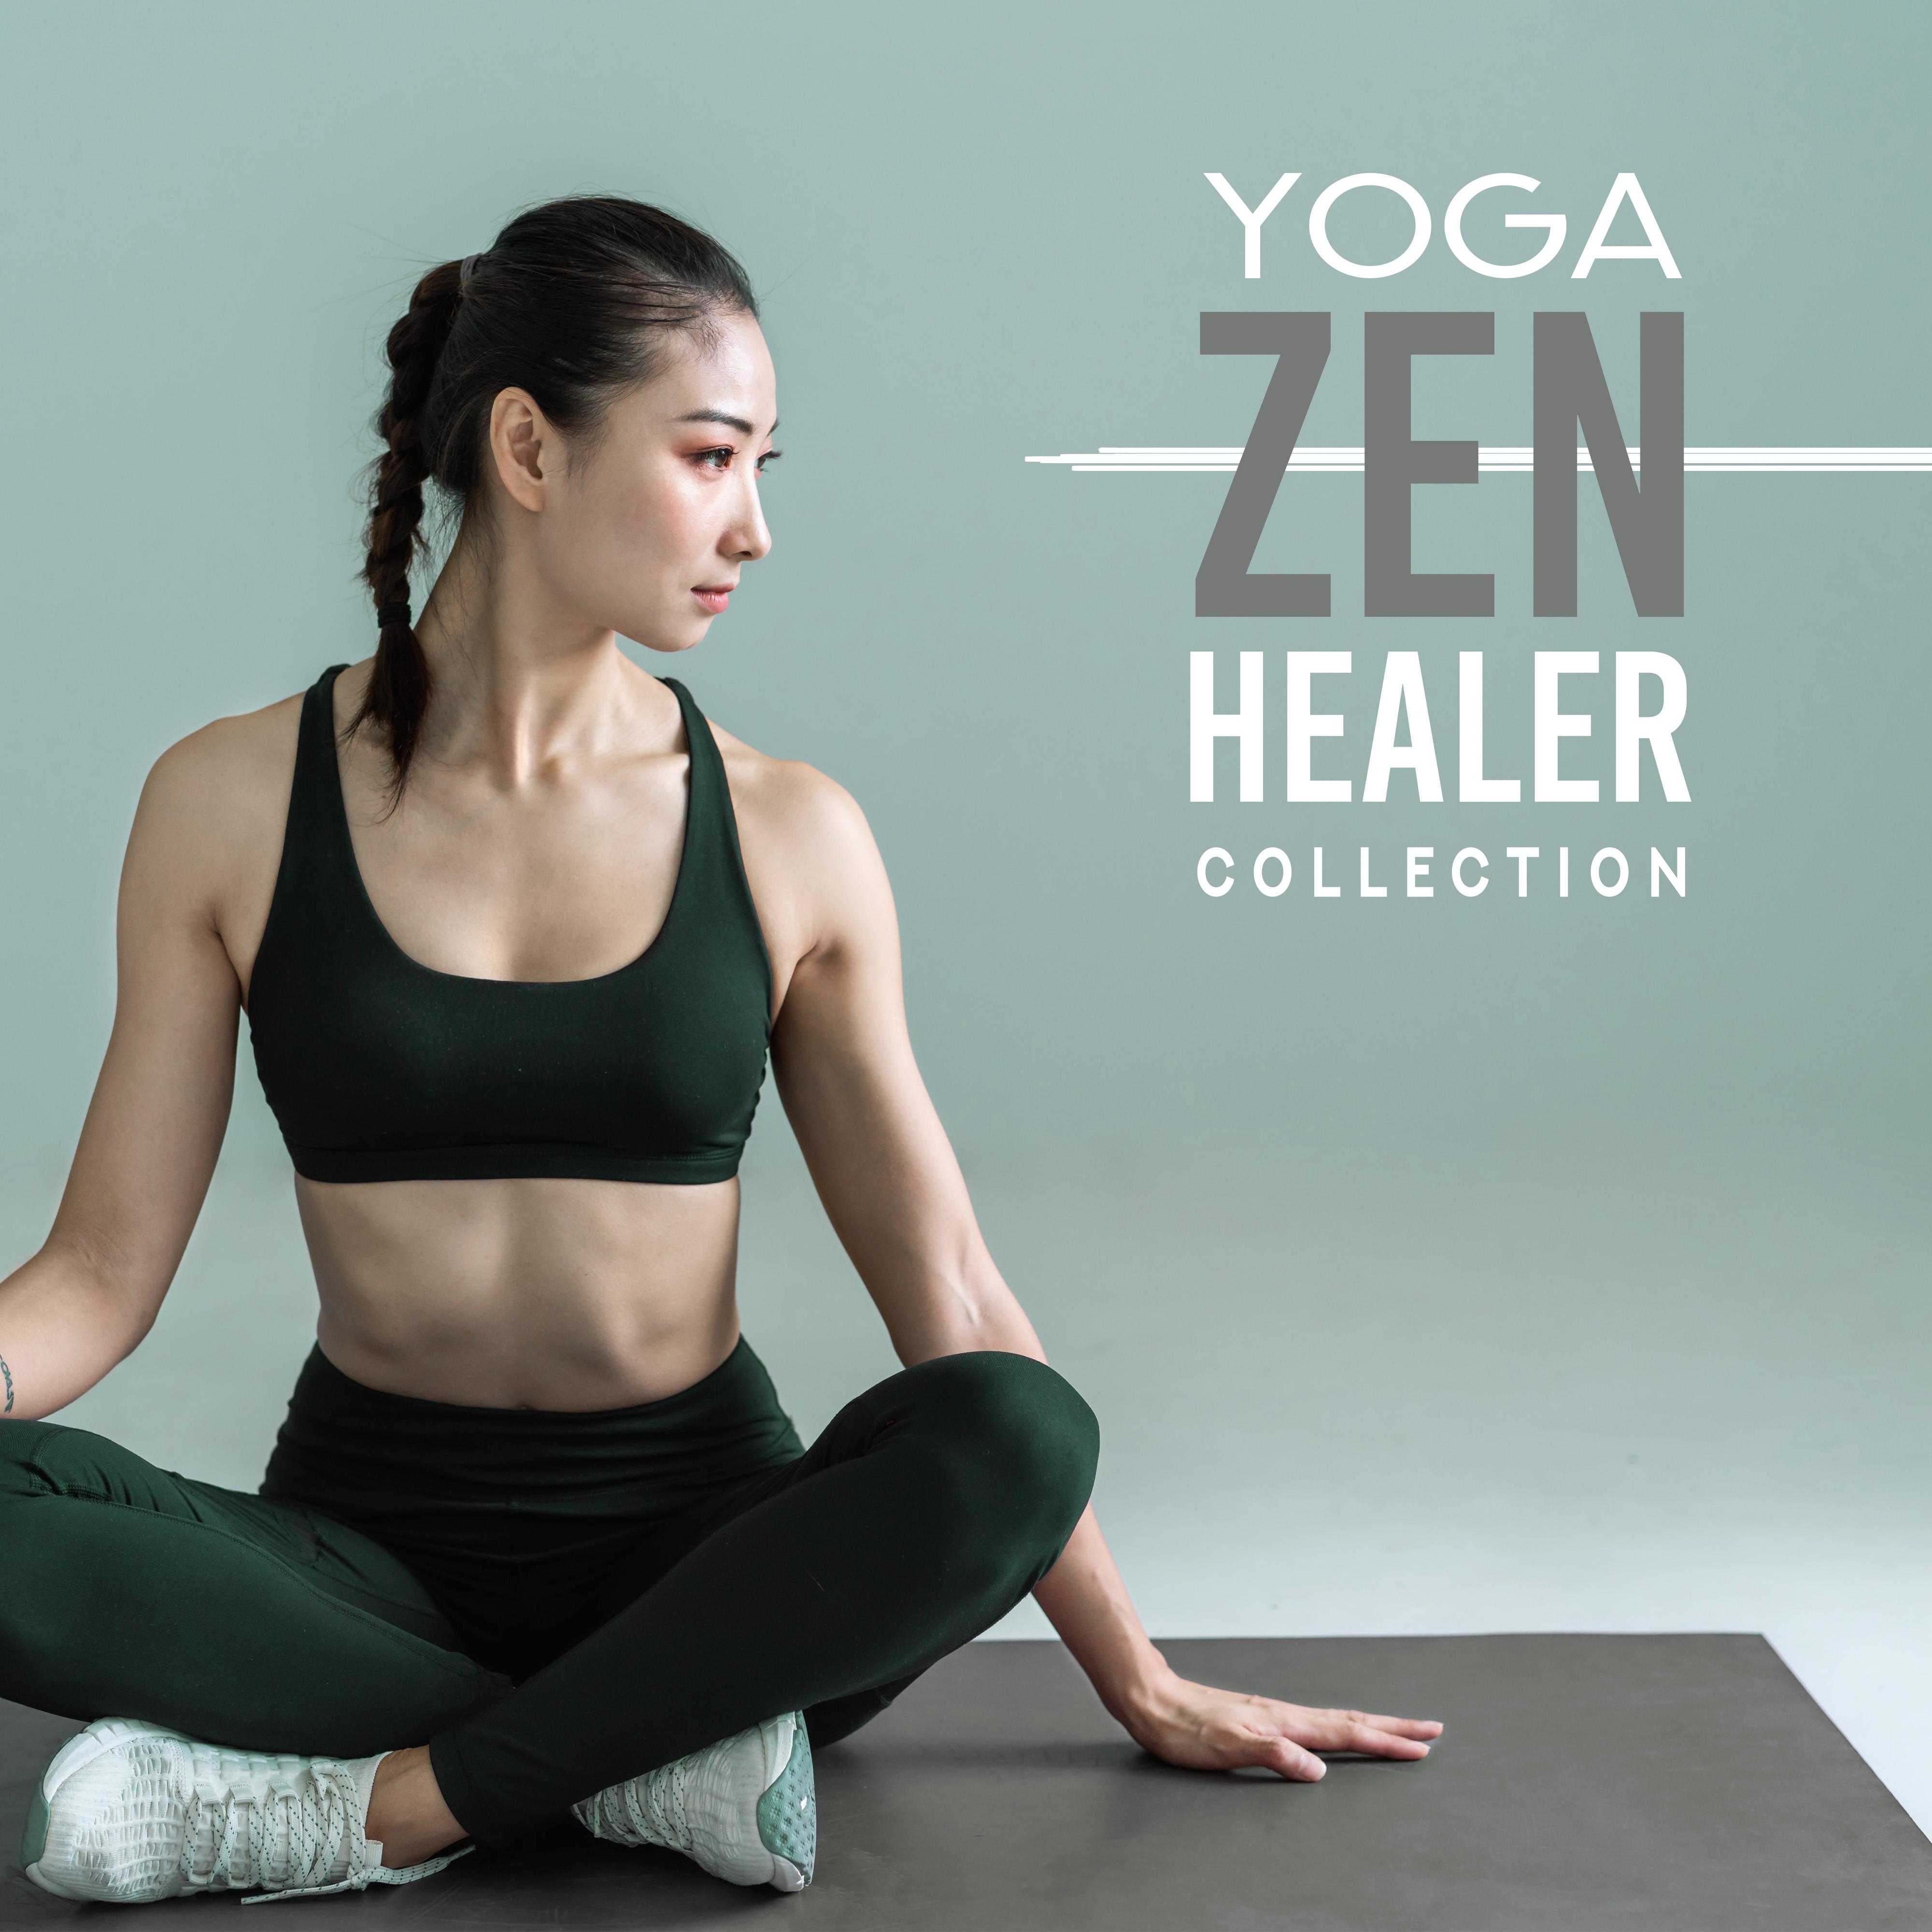 Yoga Zen Healer Collection: New Age Newest 2019 Music for Best Meditation & Relaxation Experience